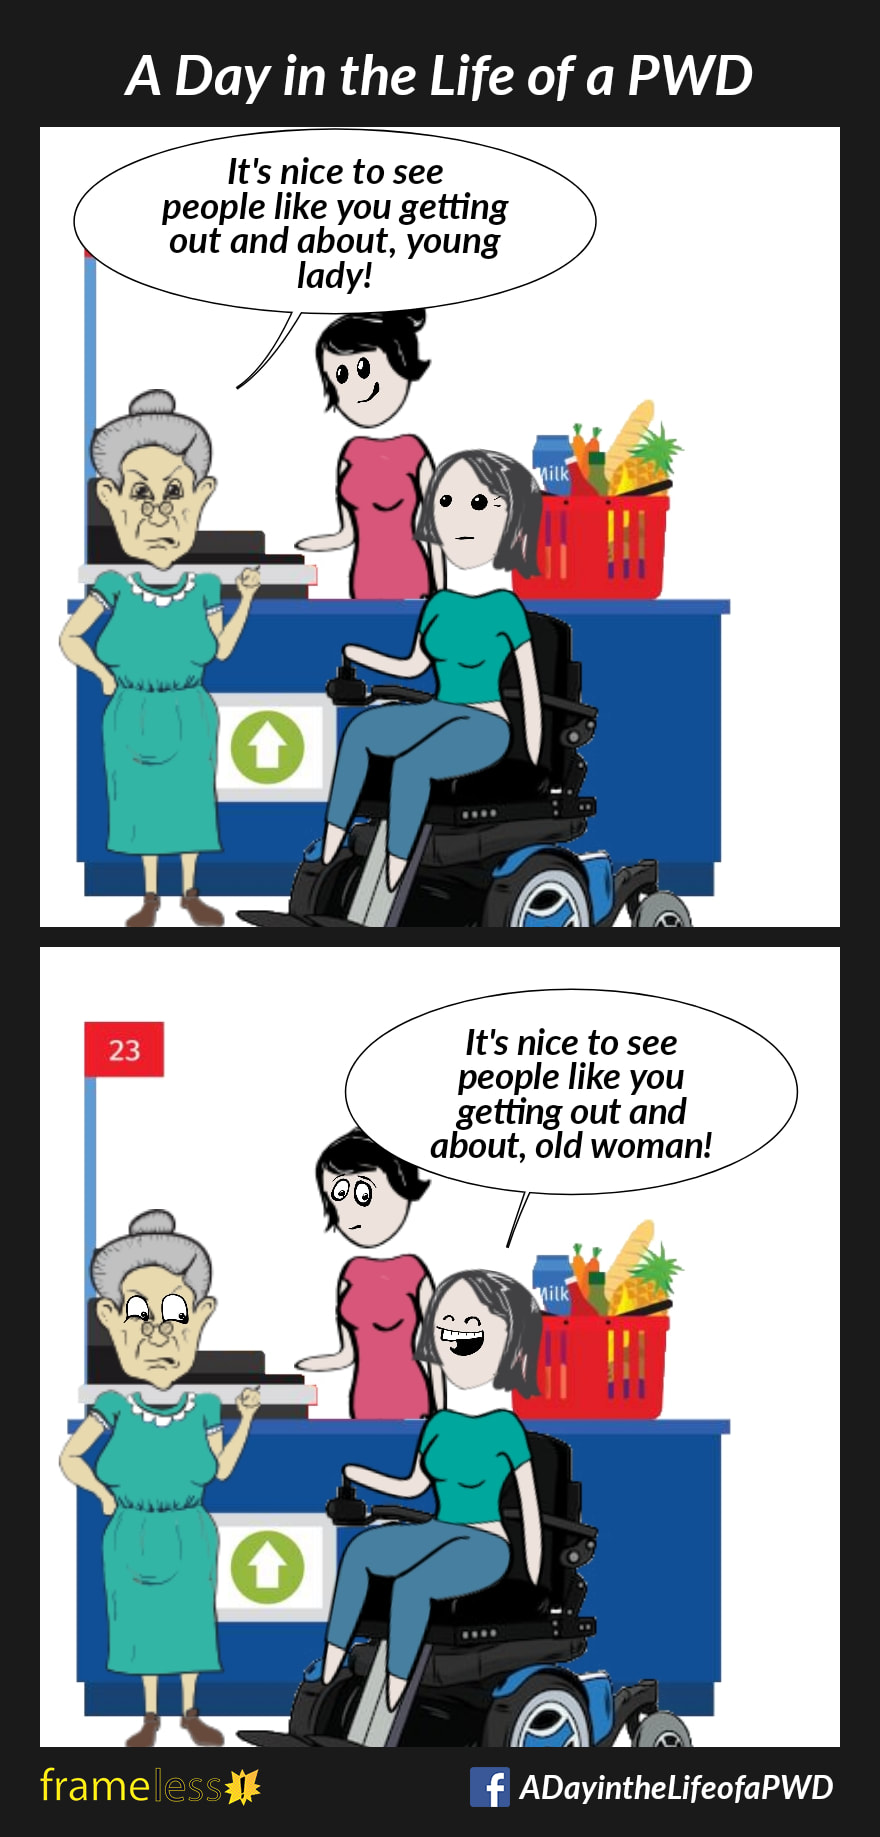 COMIC STRIP 
A Day in the Life of a PWD (Person With a Disability) 

Frame 1:
A woman in a power wheelchair is at the cashier in a grocery store.
There is an elderly woman in the line behind her.
ELDER: It's nice to see people like you getting out and about, young lady!

Frame 2:
WOMAN: It's nice to see people like you getting out and about, old woman!